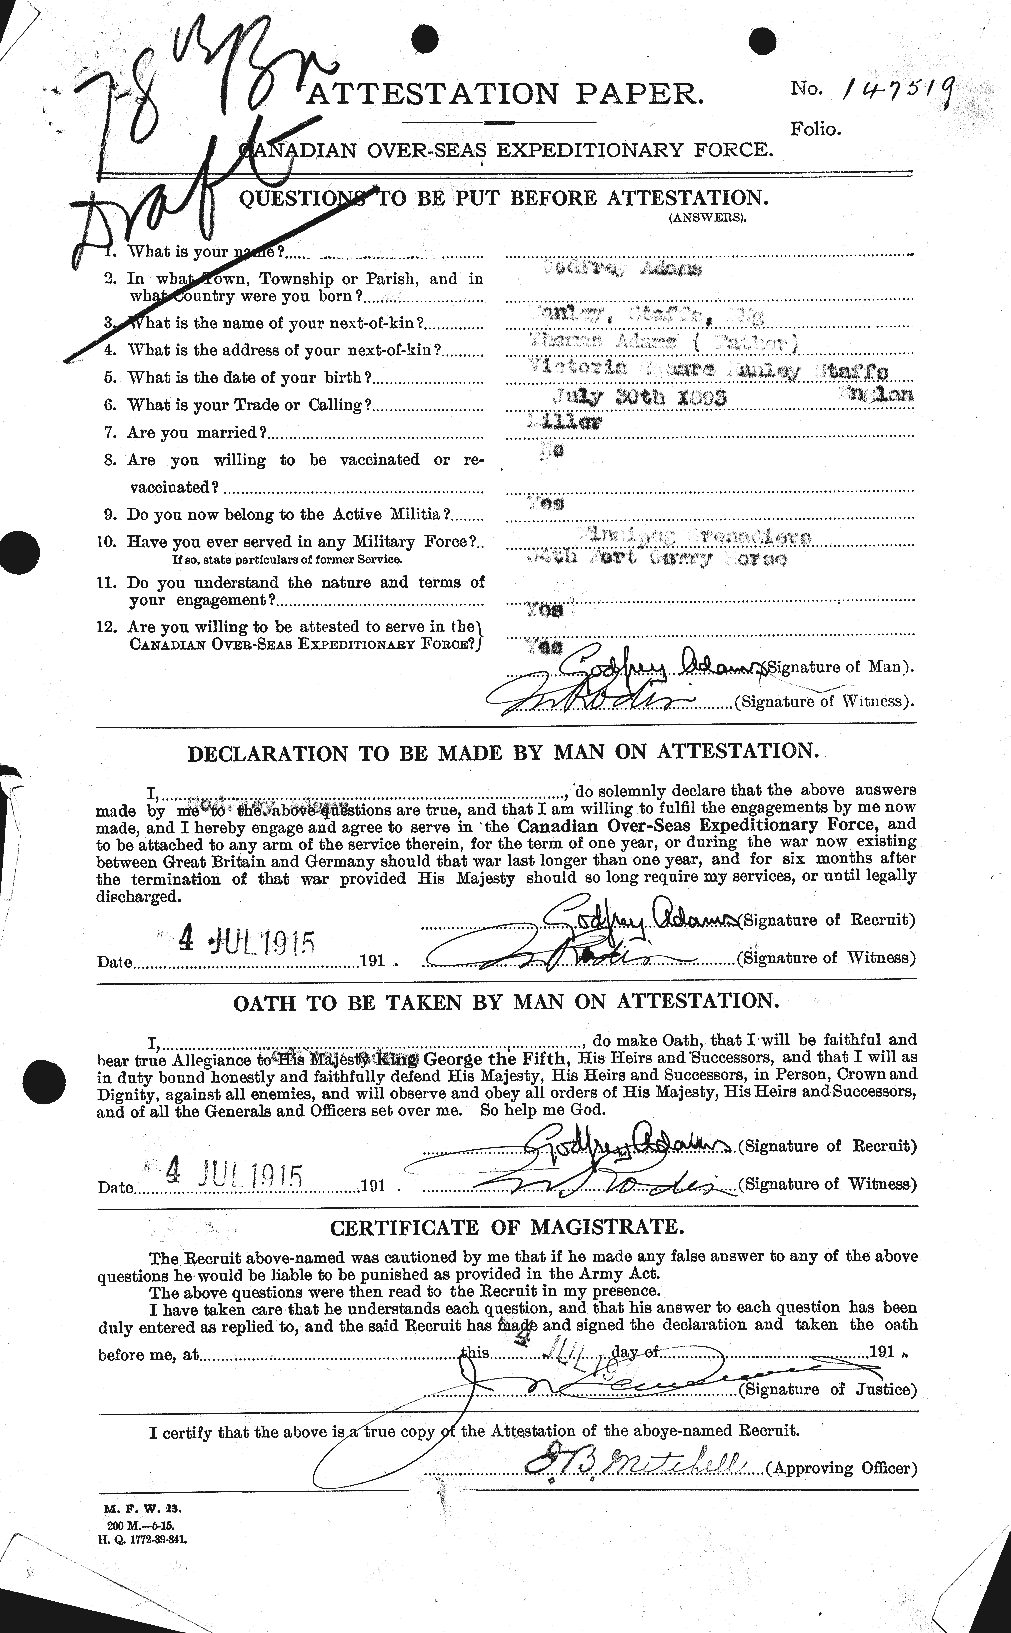 Personnel Records of the First World War - CEF 203134a